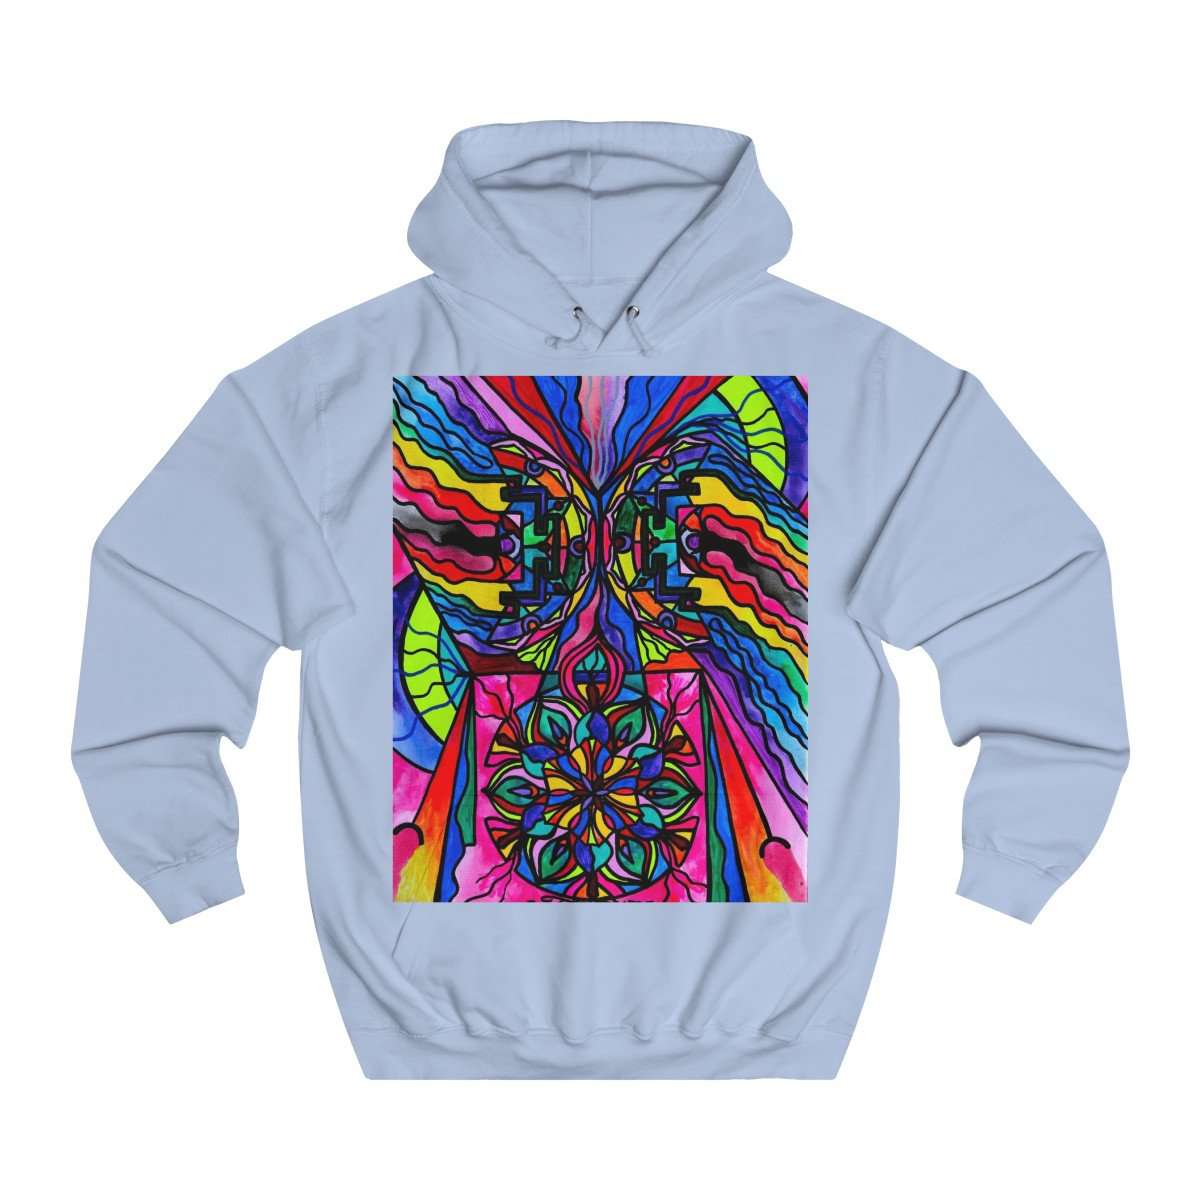 shop-for-non-attachment-unisex-college-hoodie-hot-on-sale_7.jpg